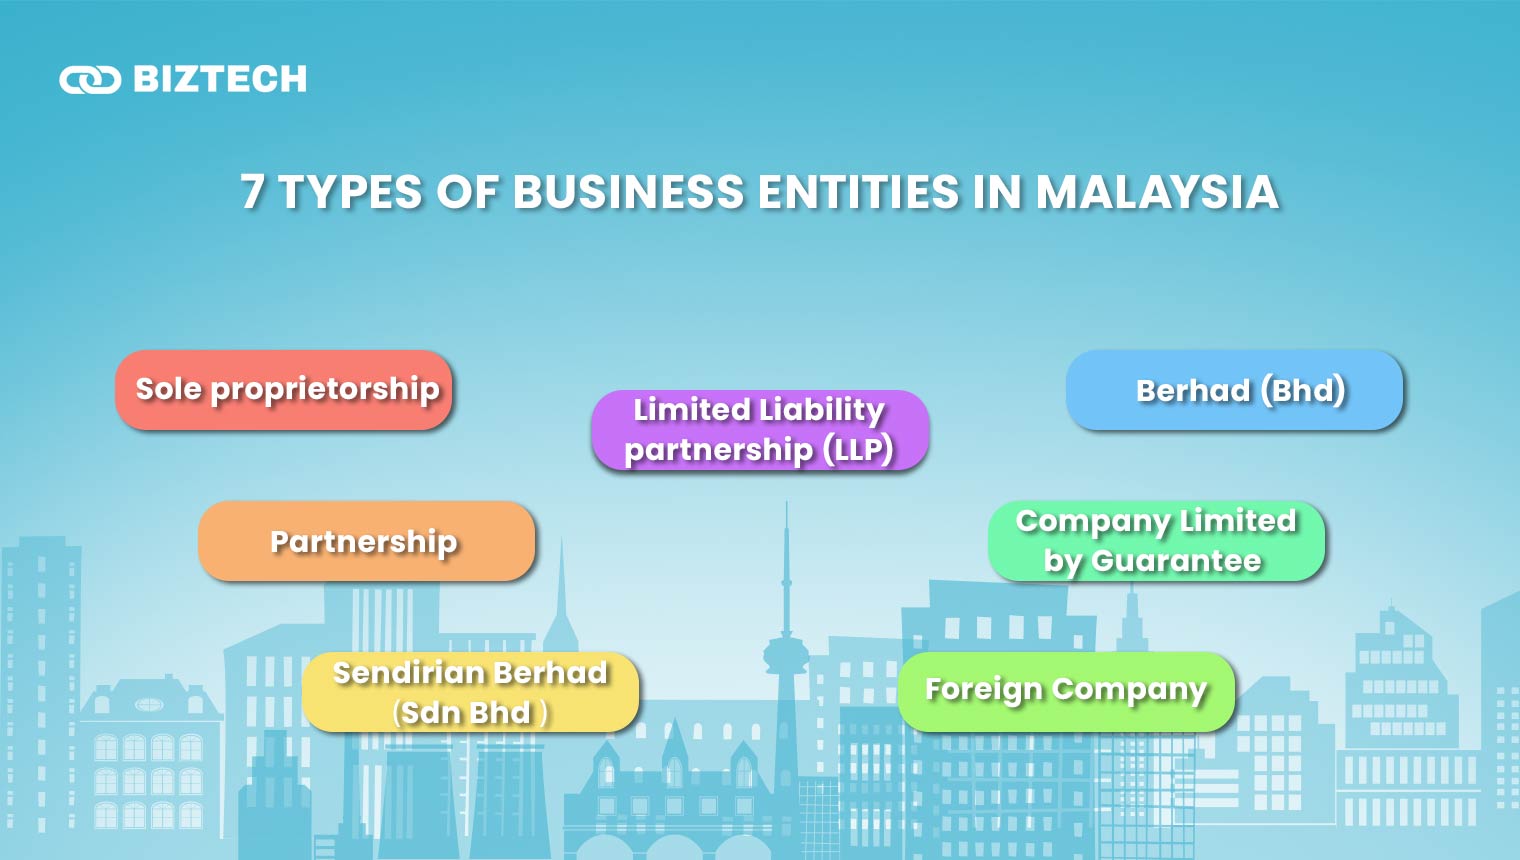 7 Types of Business Entities in Malaysia